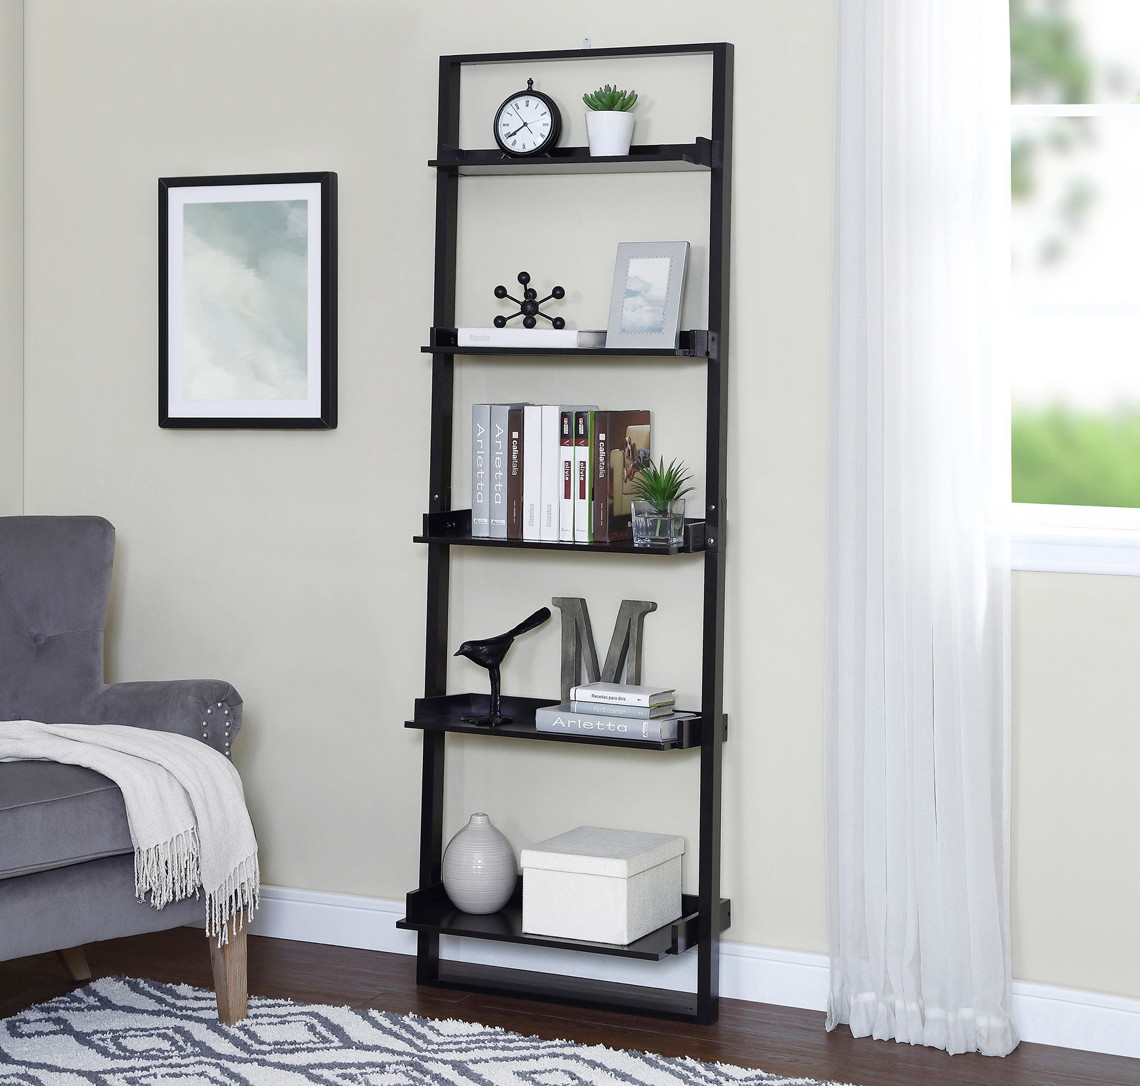 Mainstays 5 Shelf Ladder Bookcase Only 34 At Walmart The